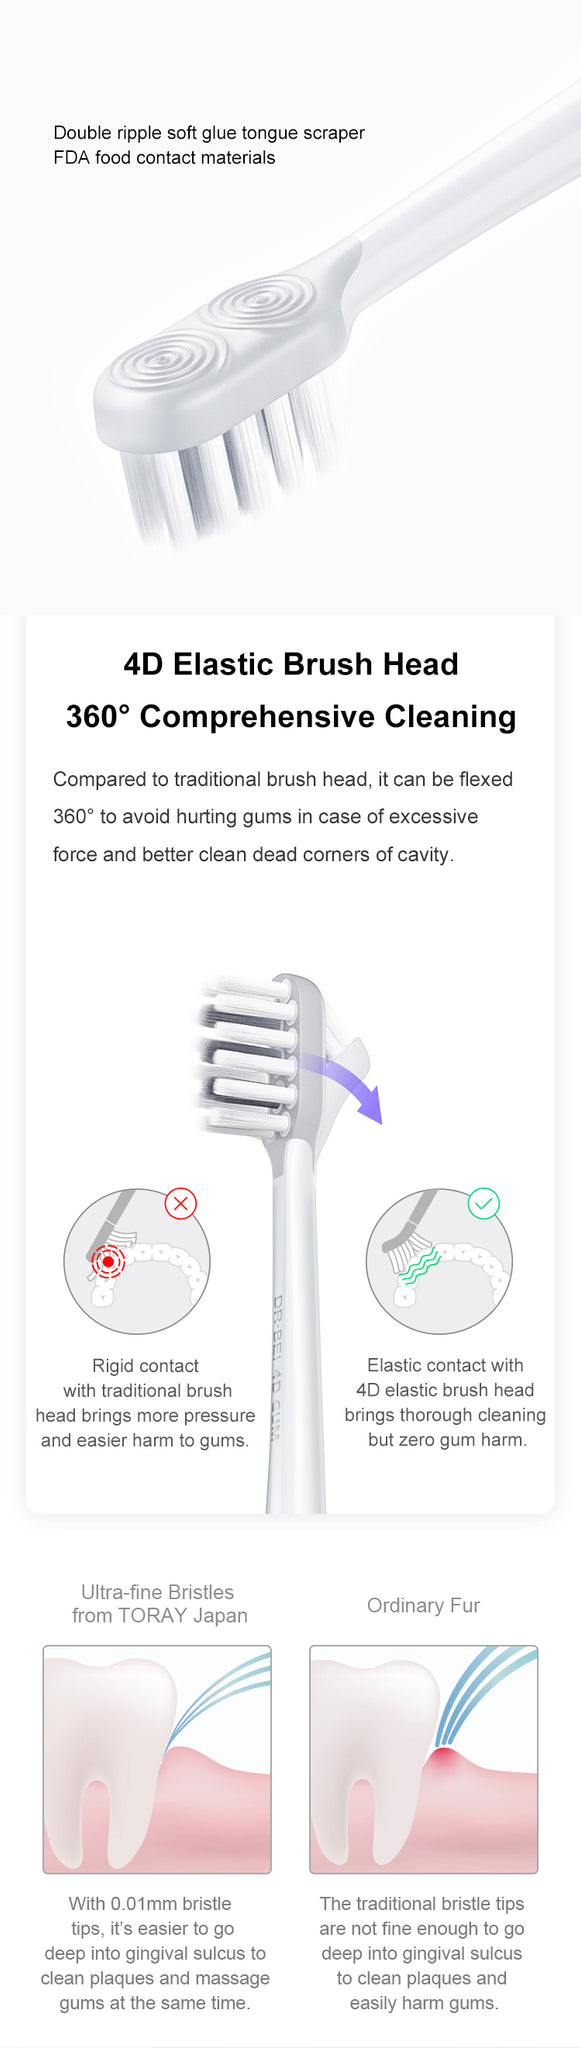 DR.BEI S7 Premium Sonic Electric Toothbrush  Xiaomi Youpin DR·BEI Electric Toothbrush S7 Rechargeable IPX7 Waterproof 2 Minutes Timer 2000mAh Battery 60 days Standby Tooth Brush Cleaner